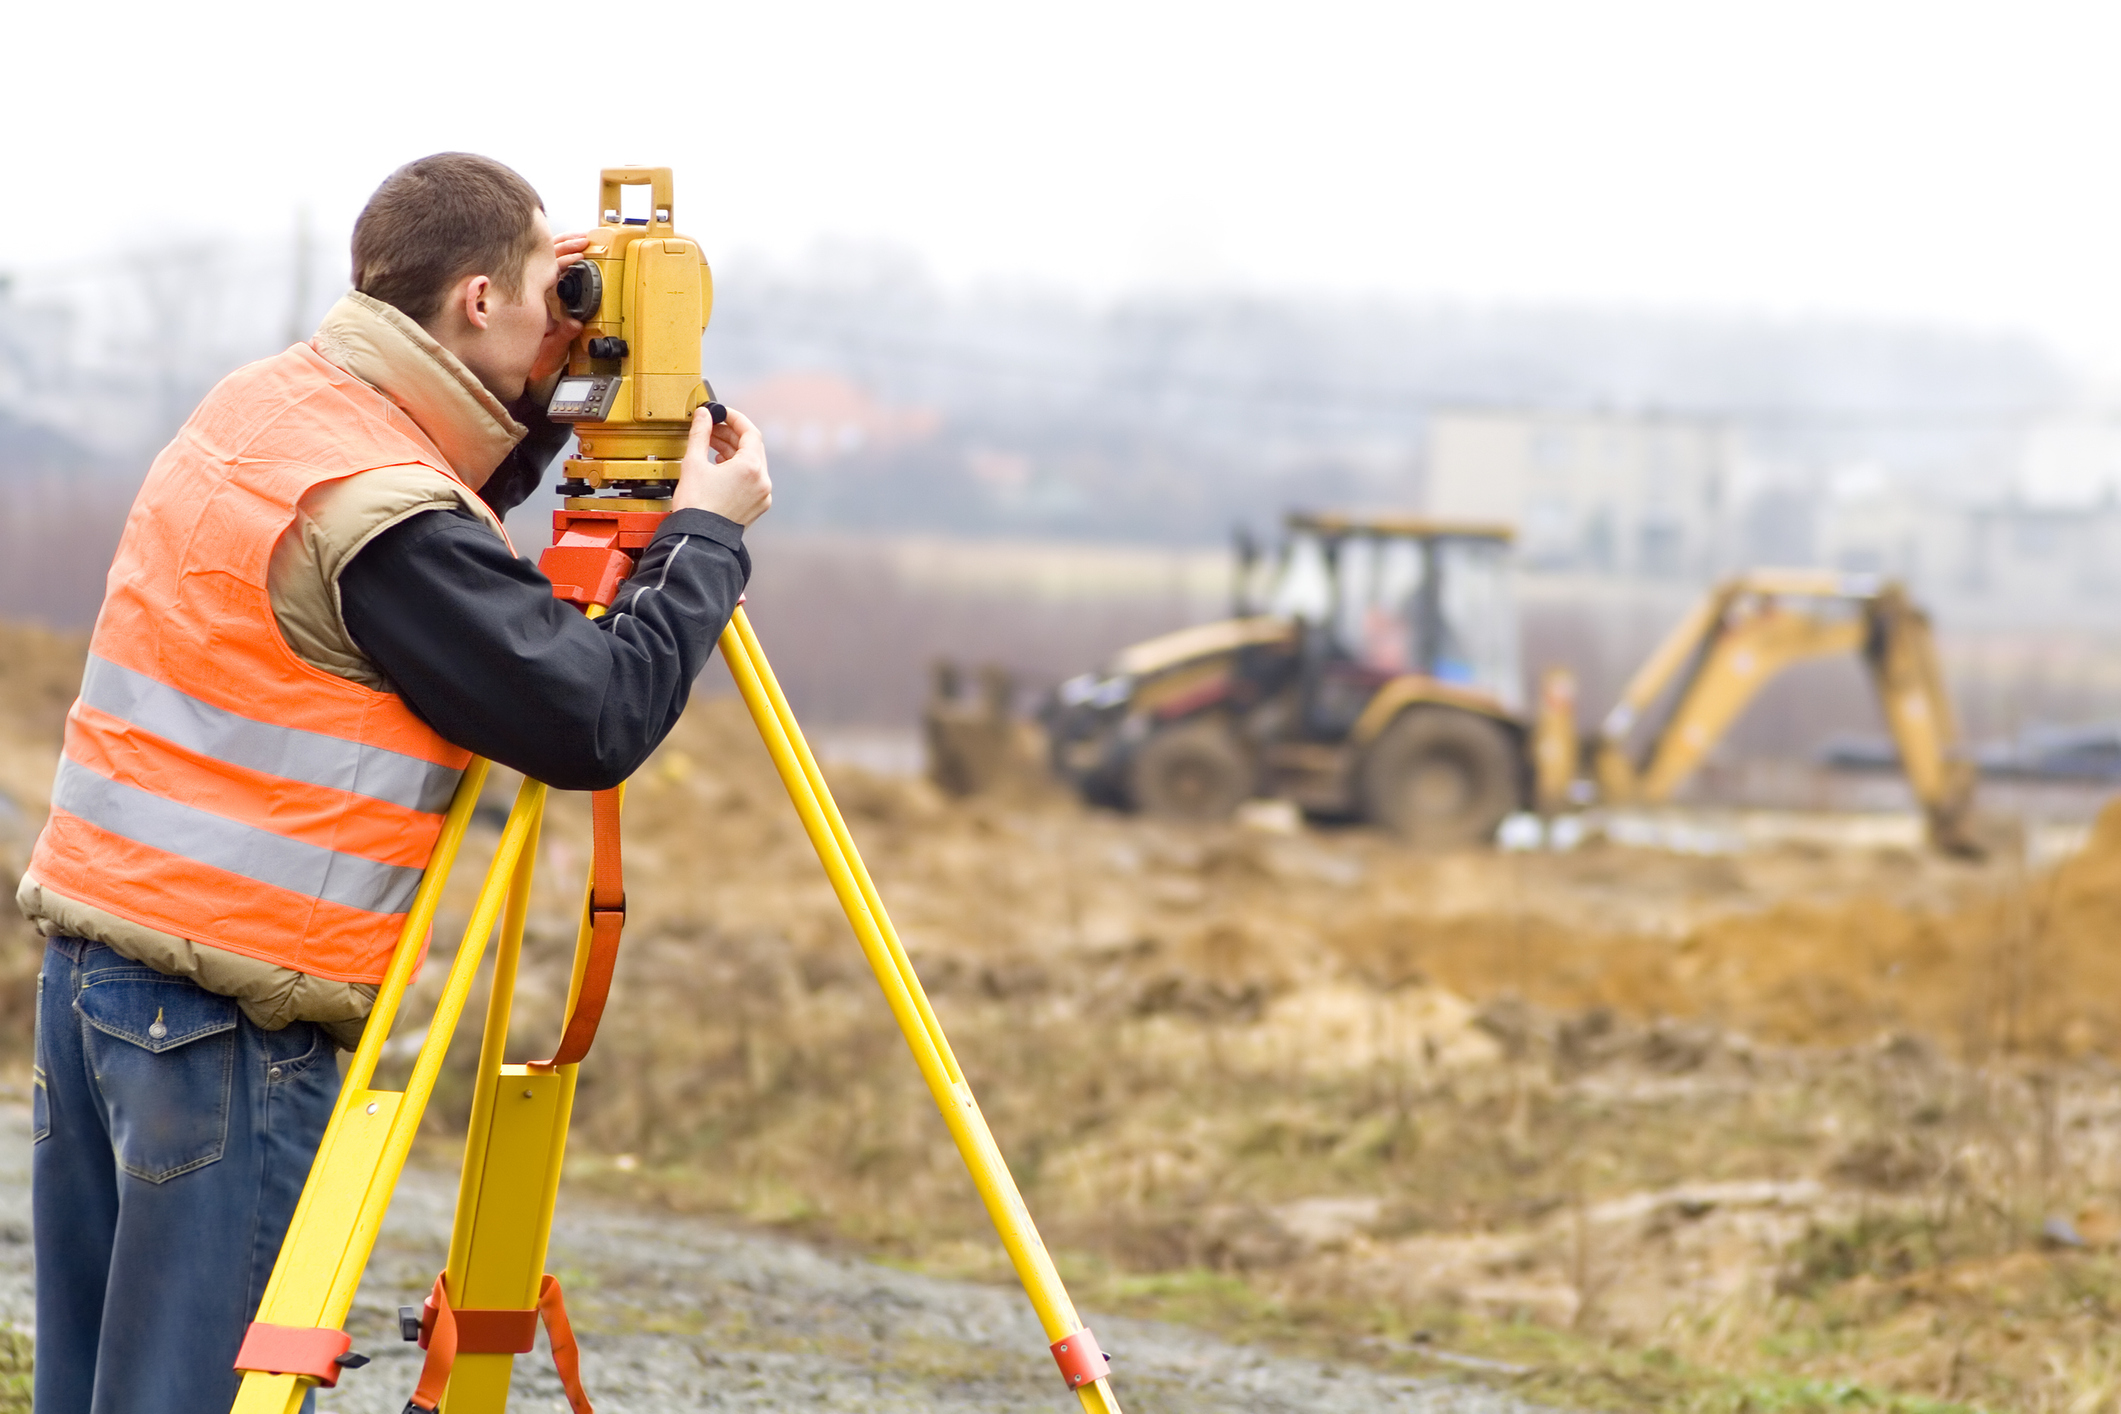 A surveyor using a theodolite on a construction site with heavy machinery in the background.